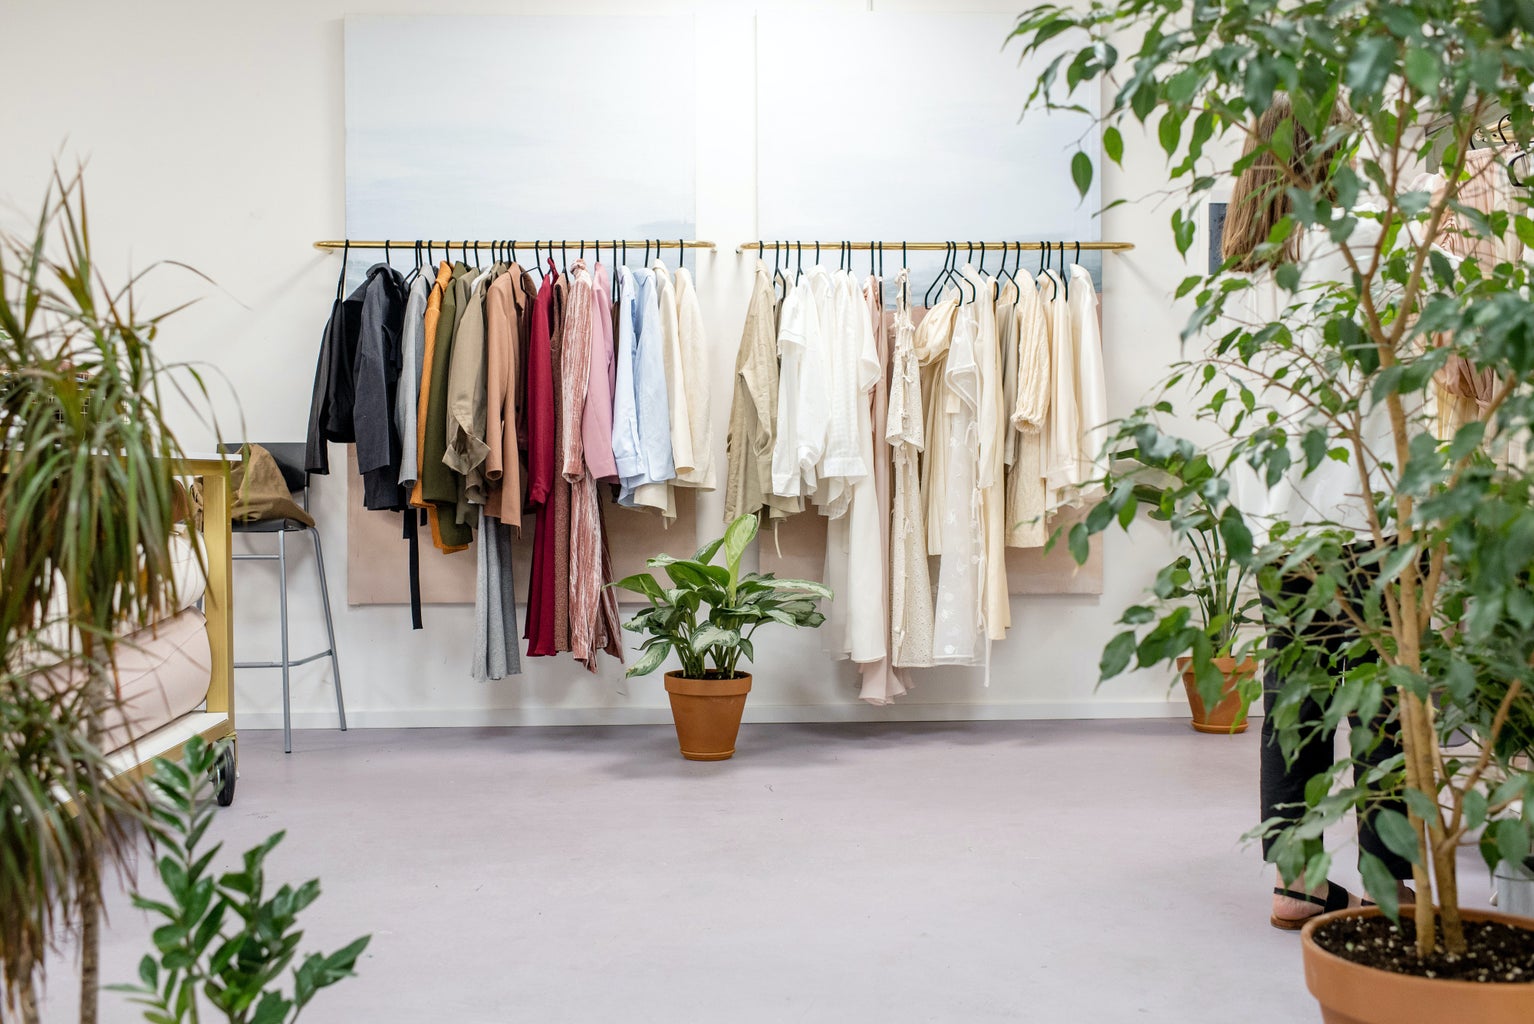 clothes on clothing rack surrounded by potted plants